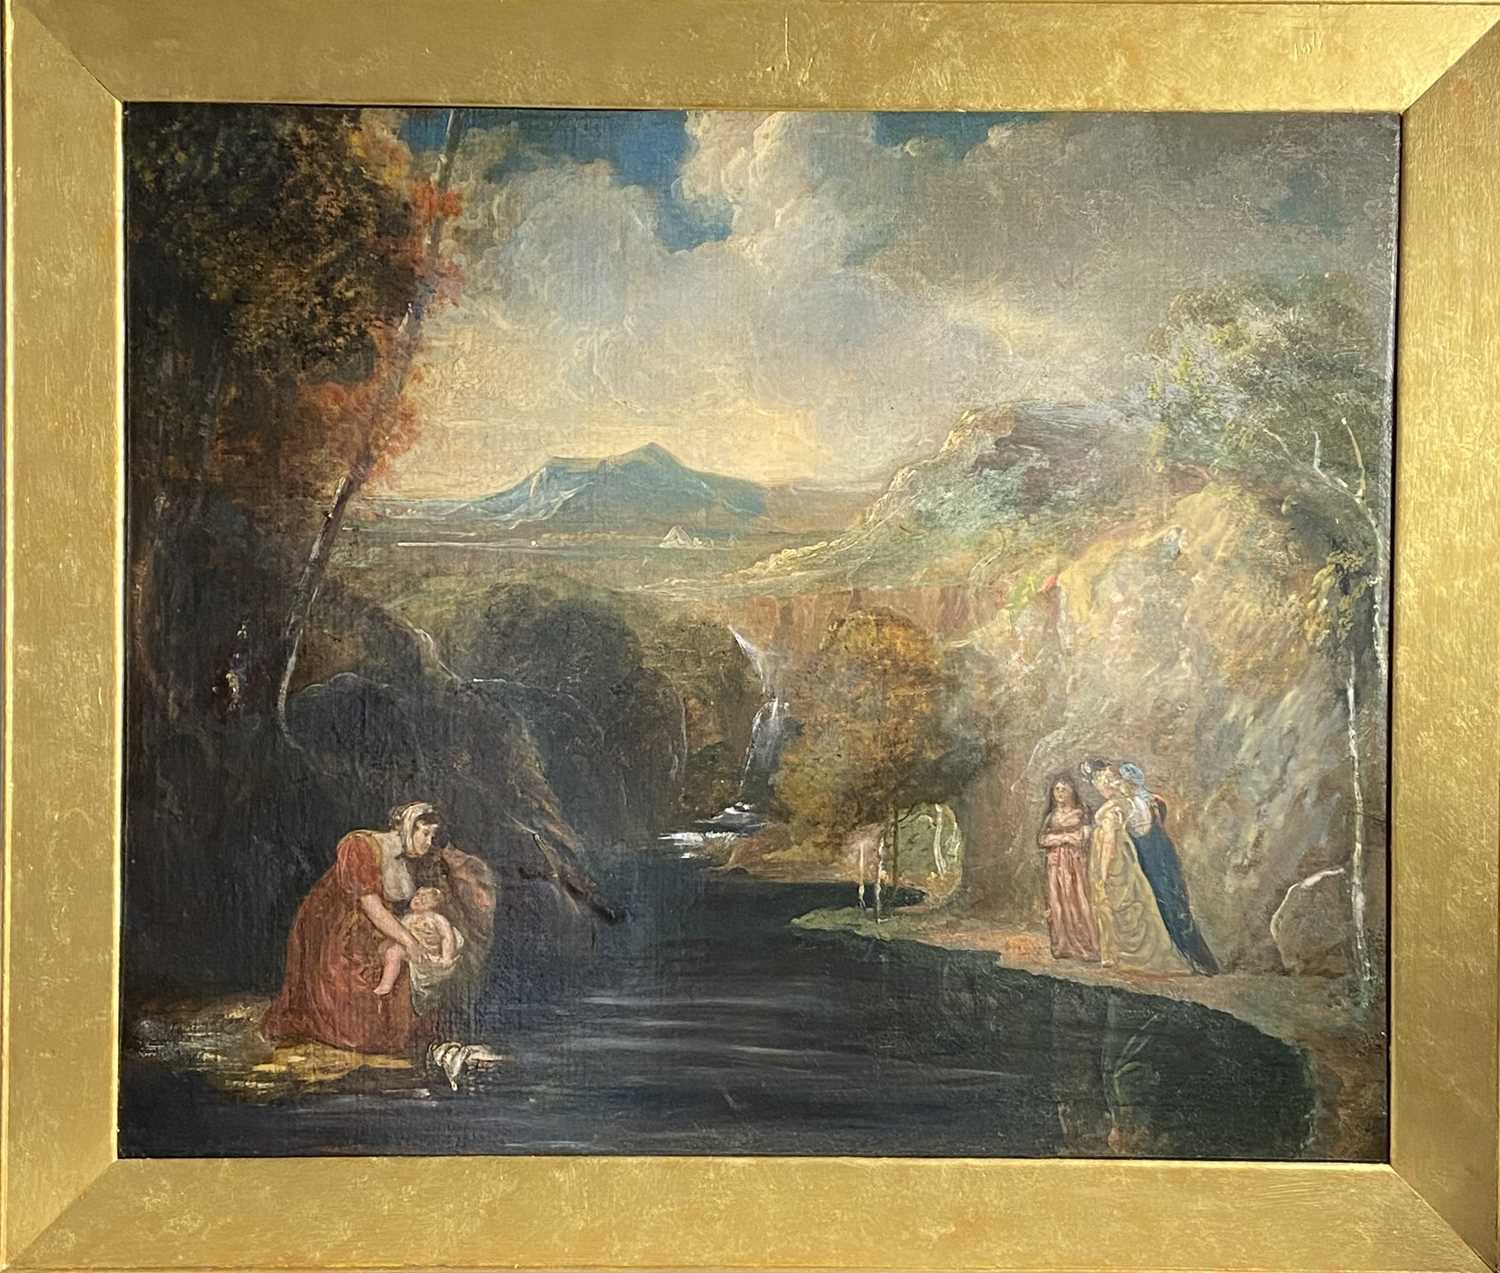 19th-Century figural group in a landscapeOil laid on canvas laid onto board62 x 75cm - Image 2 of 2